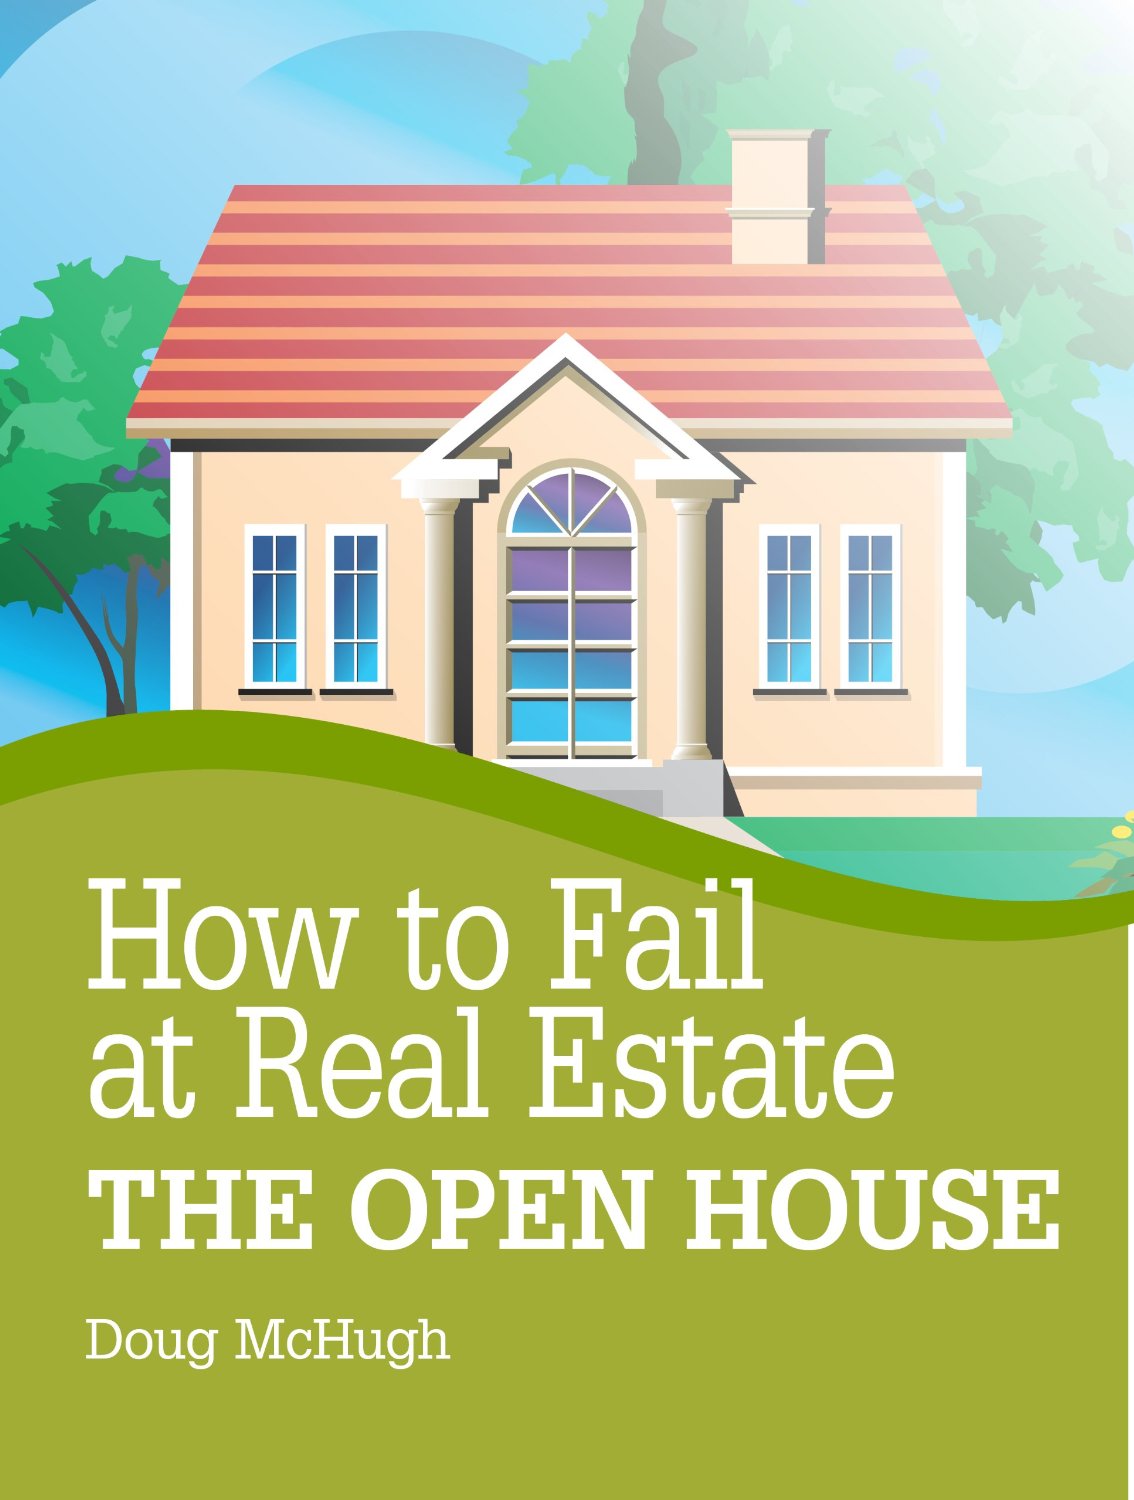 How to Fail at Real Estate: The Open House by Doug McHugh